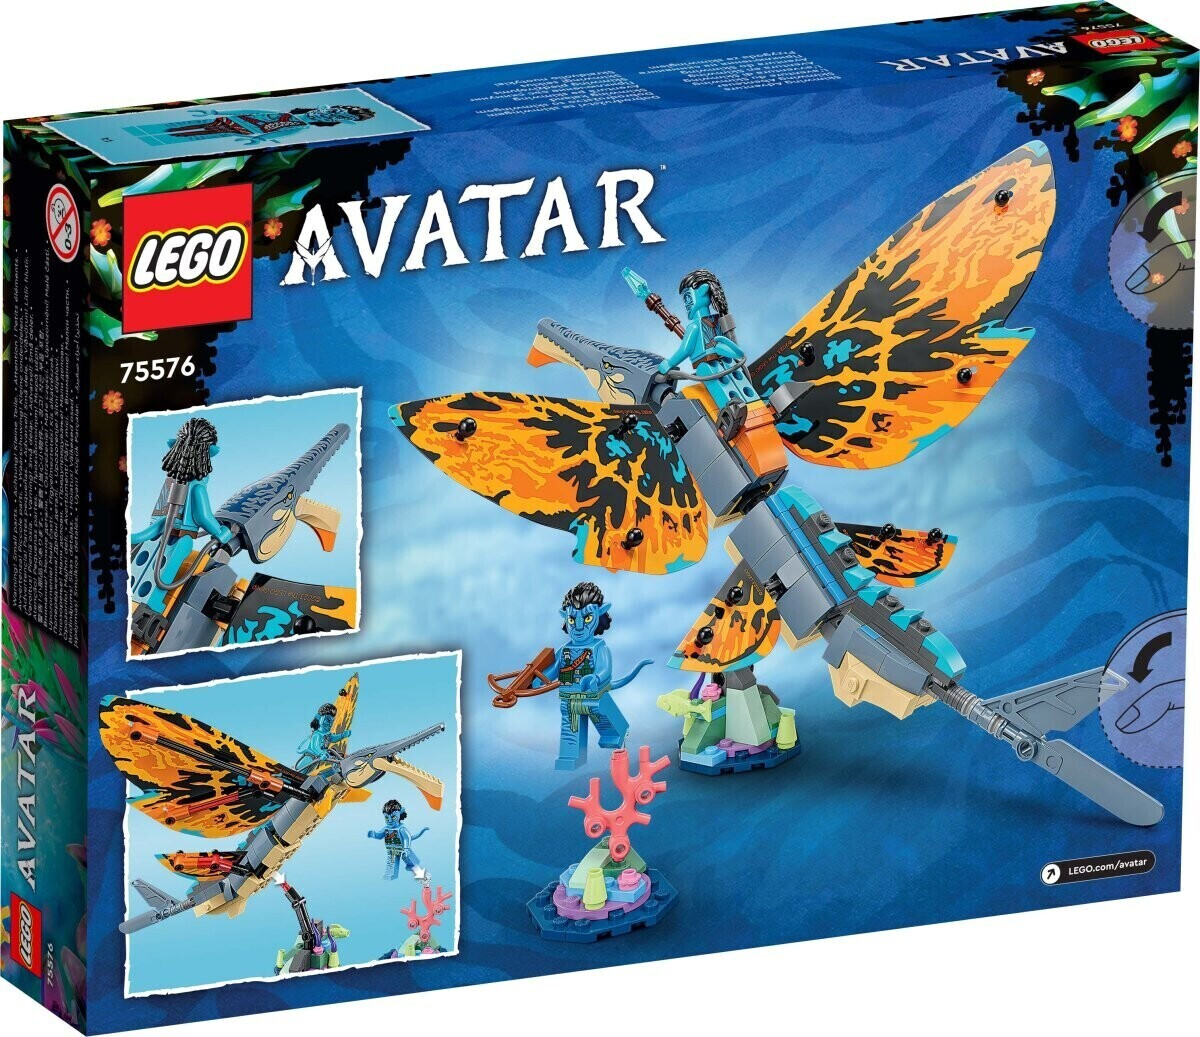 Buy LEGO 75576 from £21.17 (Today) – Best Deals on